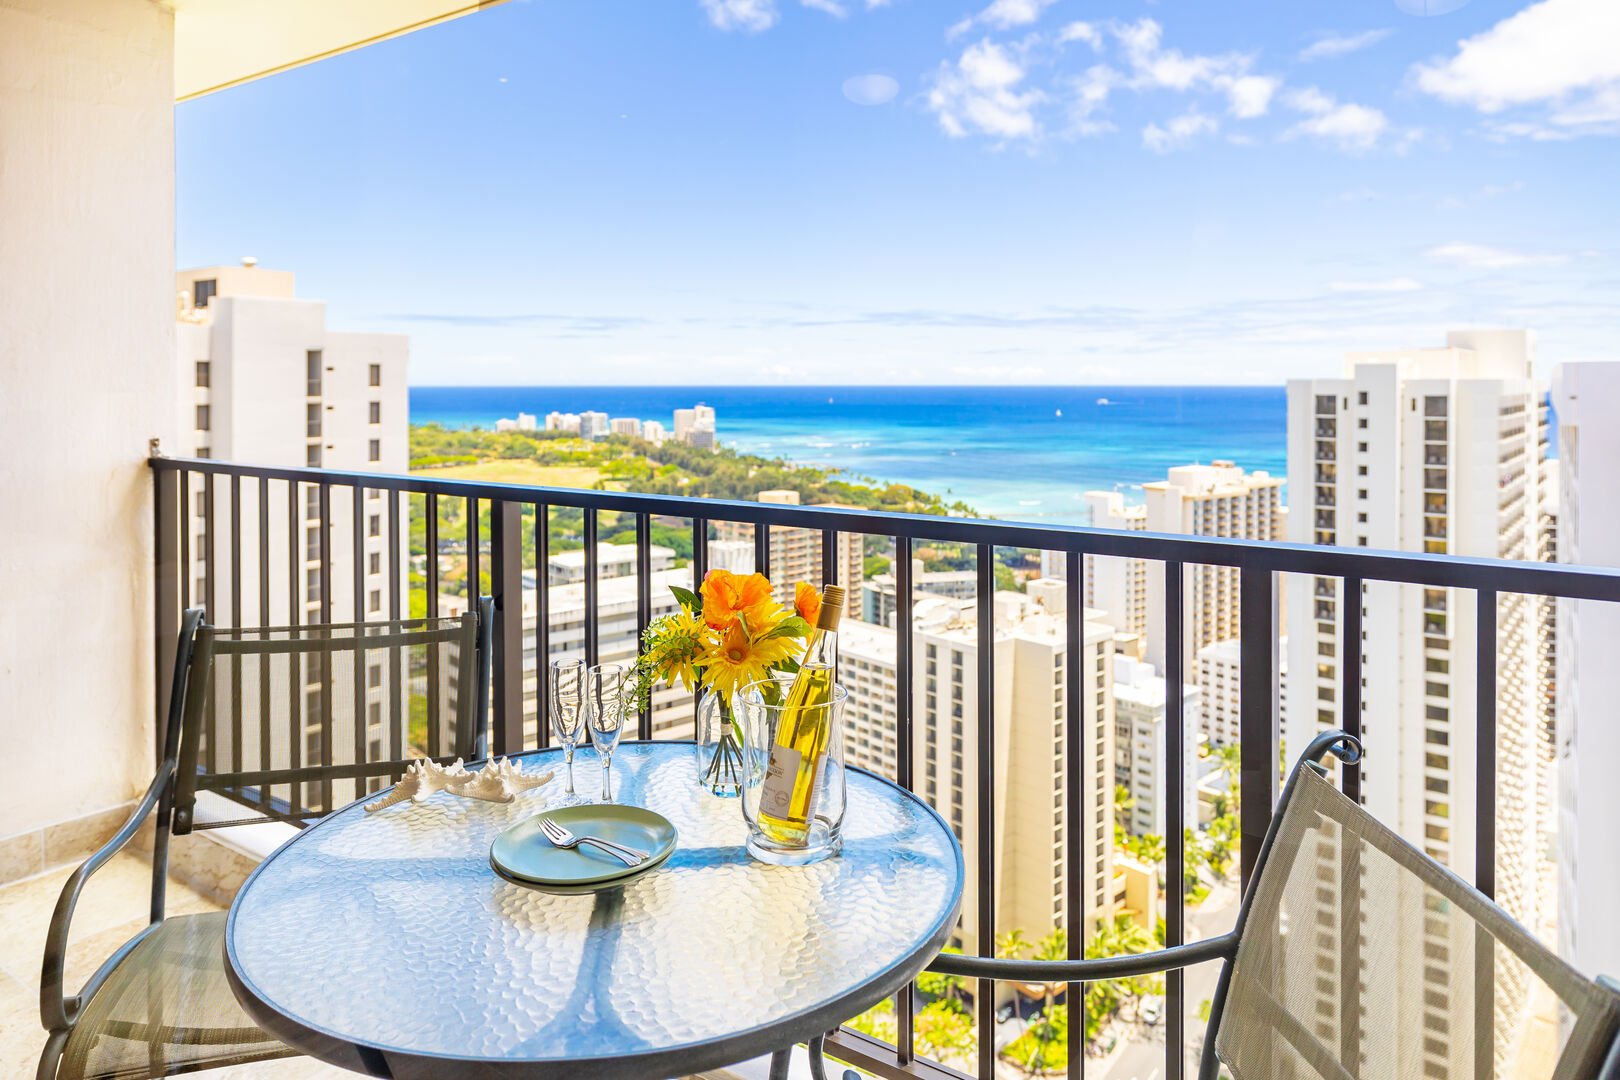 Enjoy the stunning ocean views from your balcony!